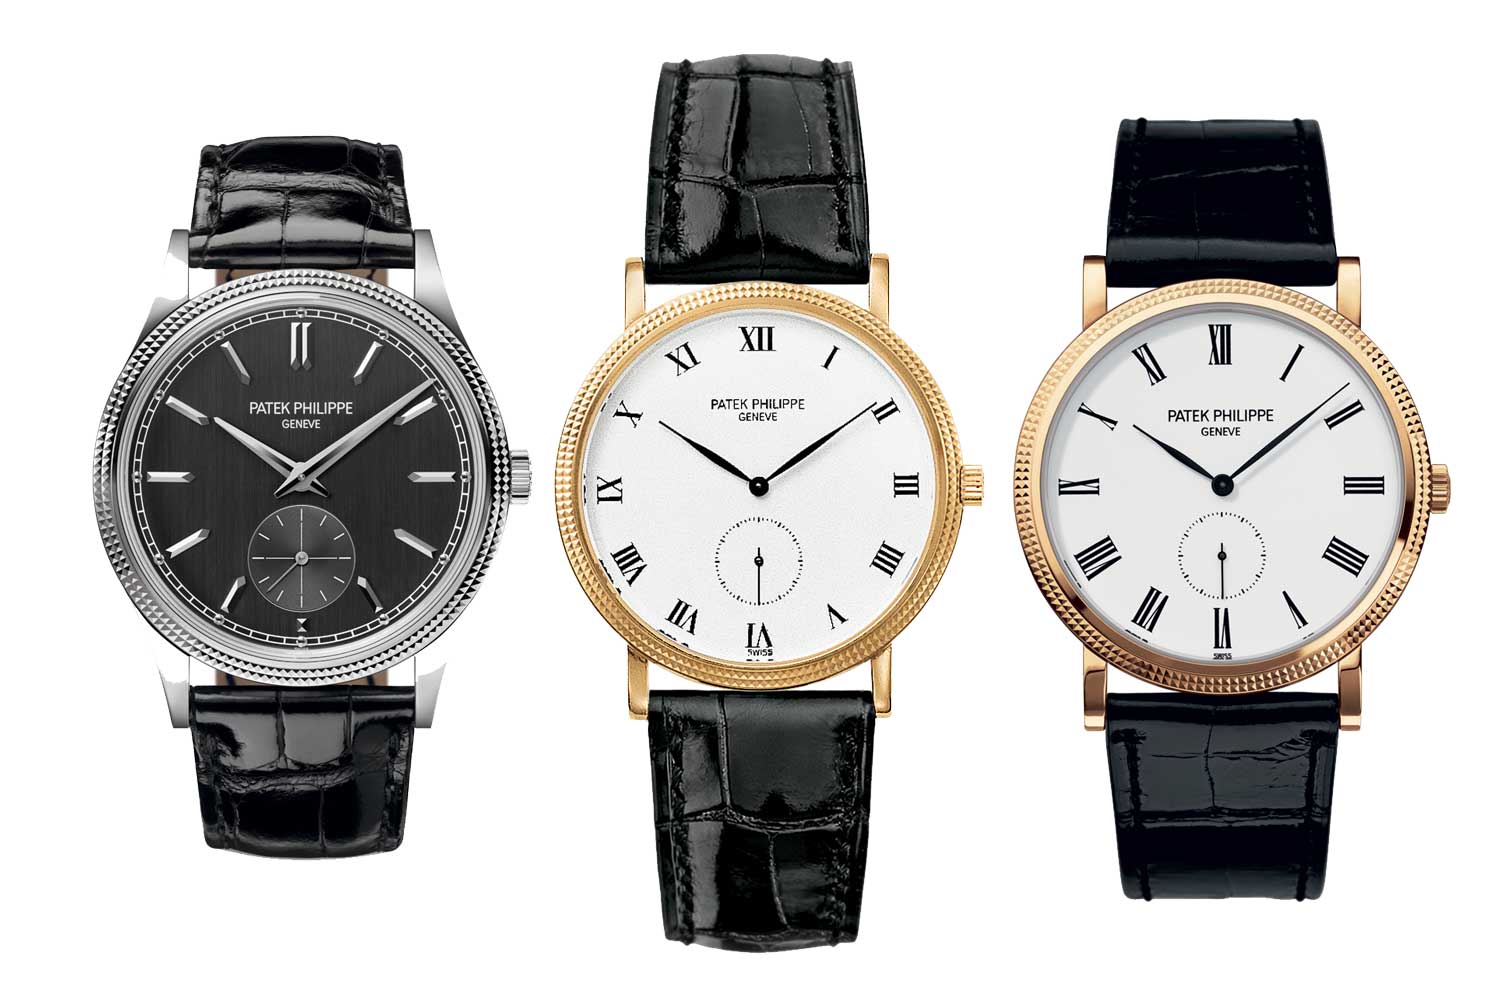 From left: The Ref. 6119 Calatrava launched in 2021; Ref. 3919 created in 1985 featured a distinct Clous de Paris design on the bezel that has been repeated in contemporary interpretations of the Calatrava and Ref. 5119 from 2006